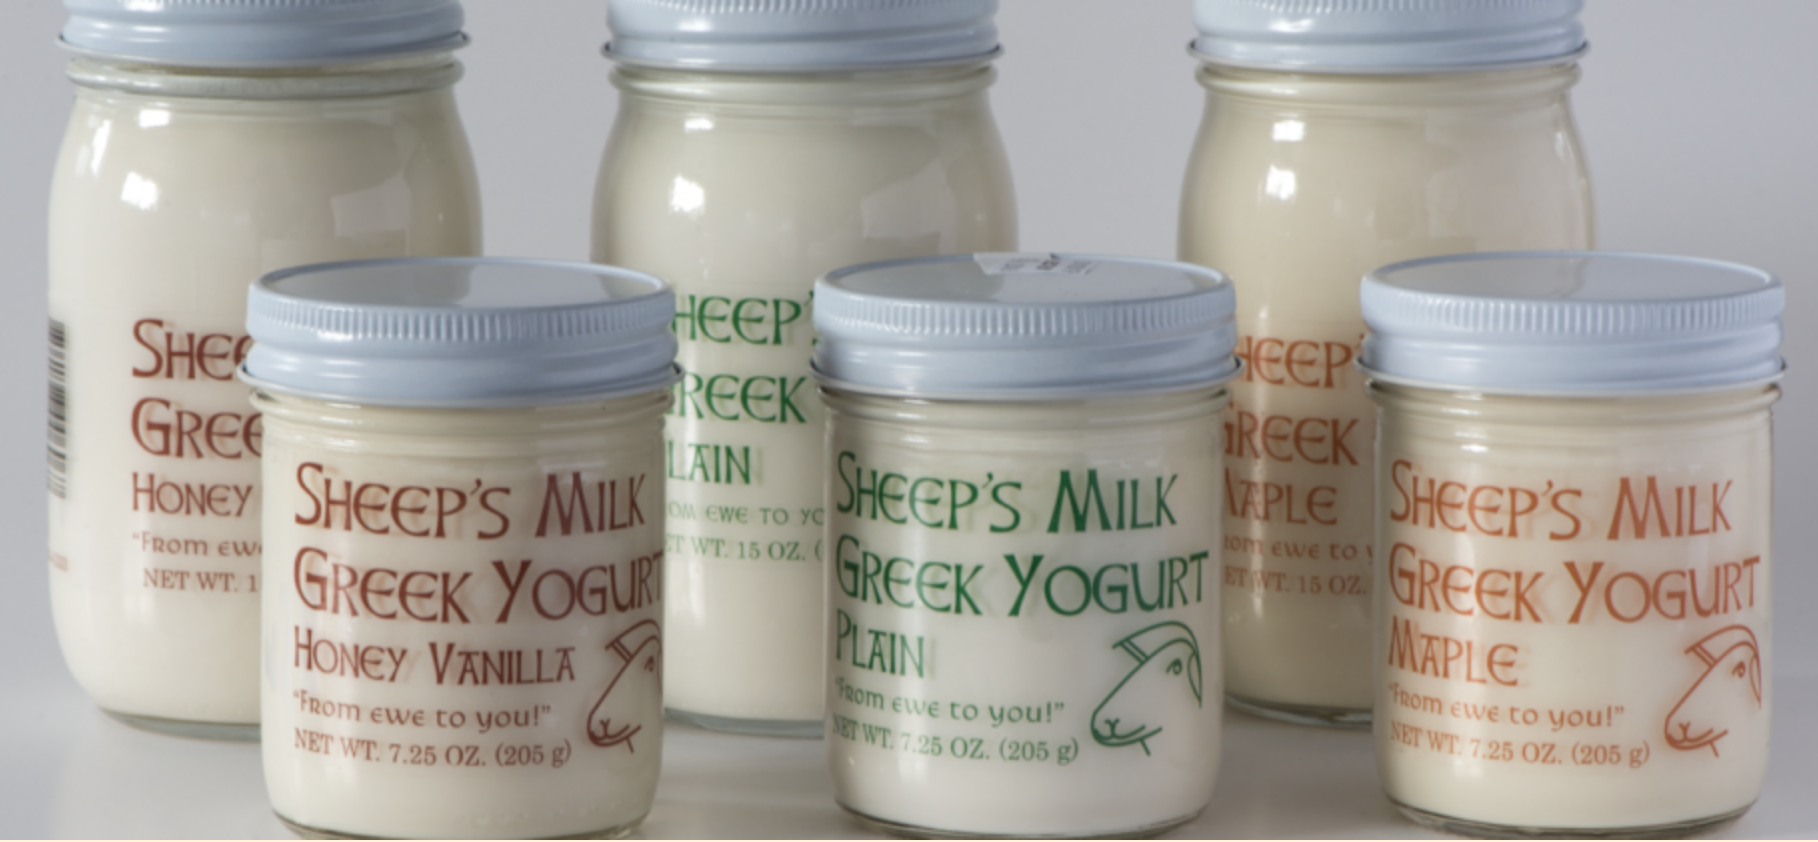 Mohawk Drumlin Creamery Sheep's Milk Greek Yogurt is available in Whole Foods Markets and specialty food stores throughout New York State